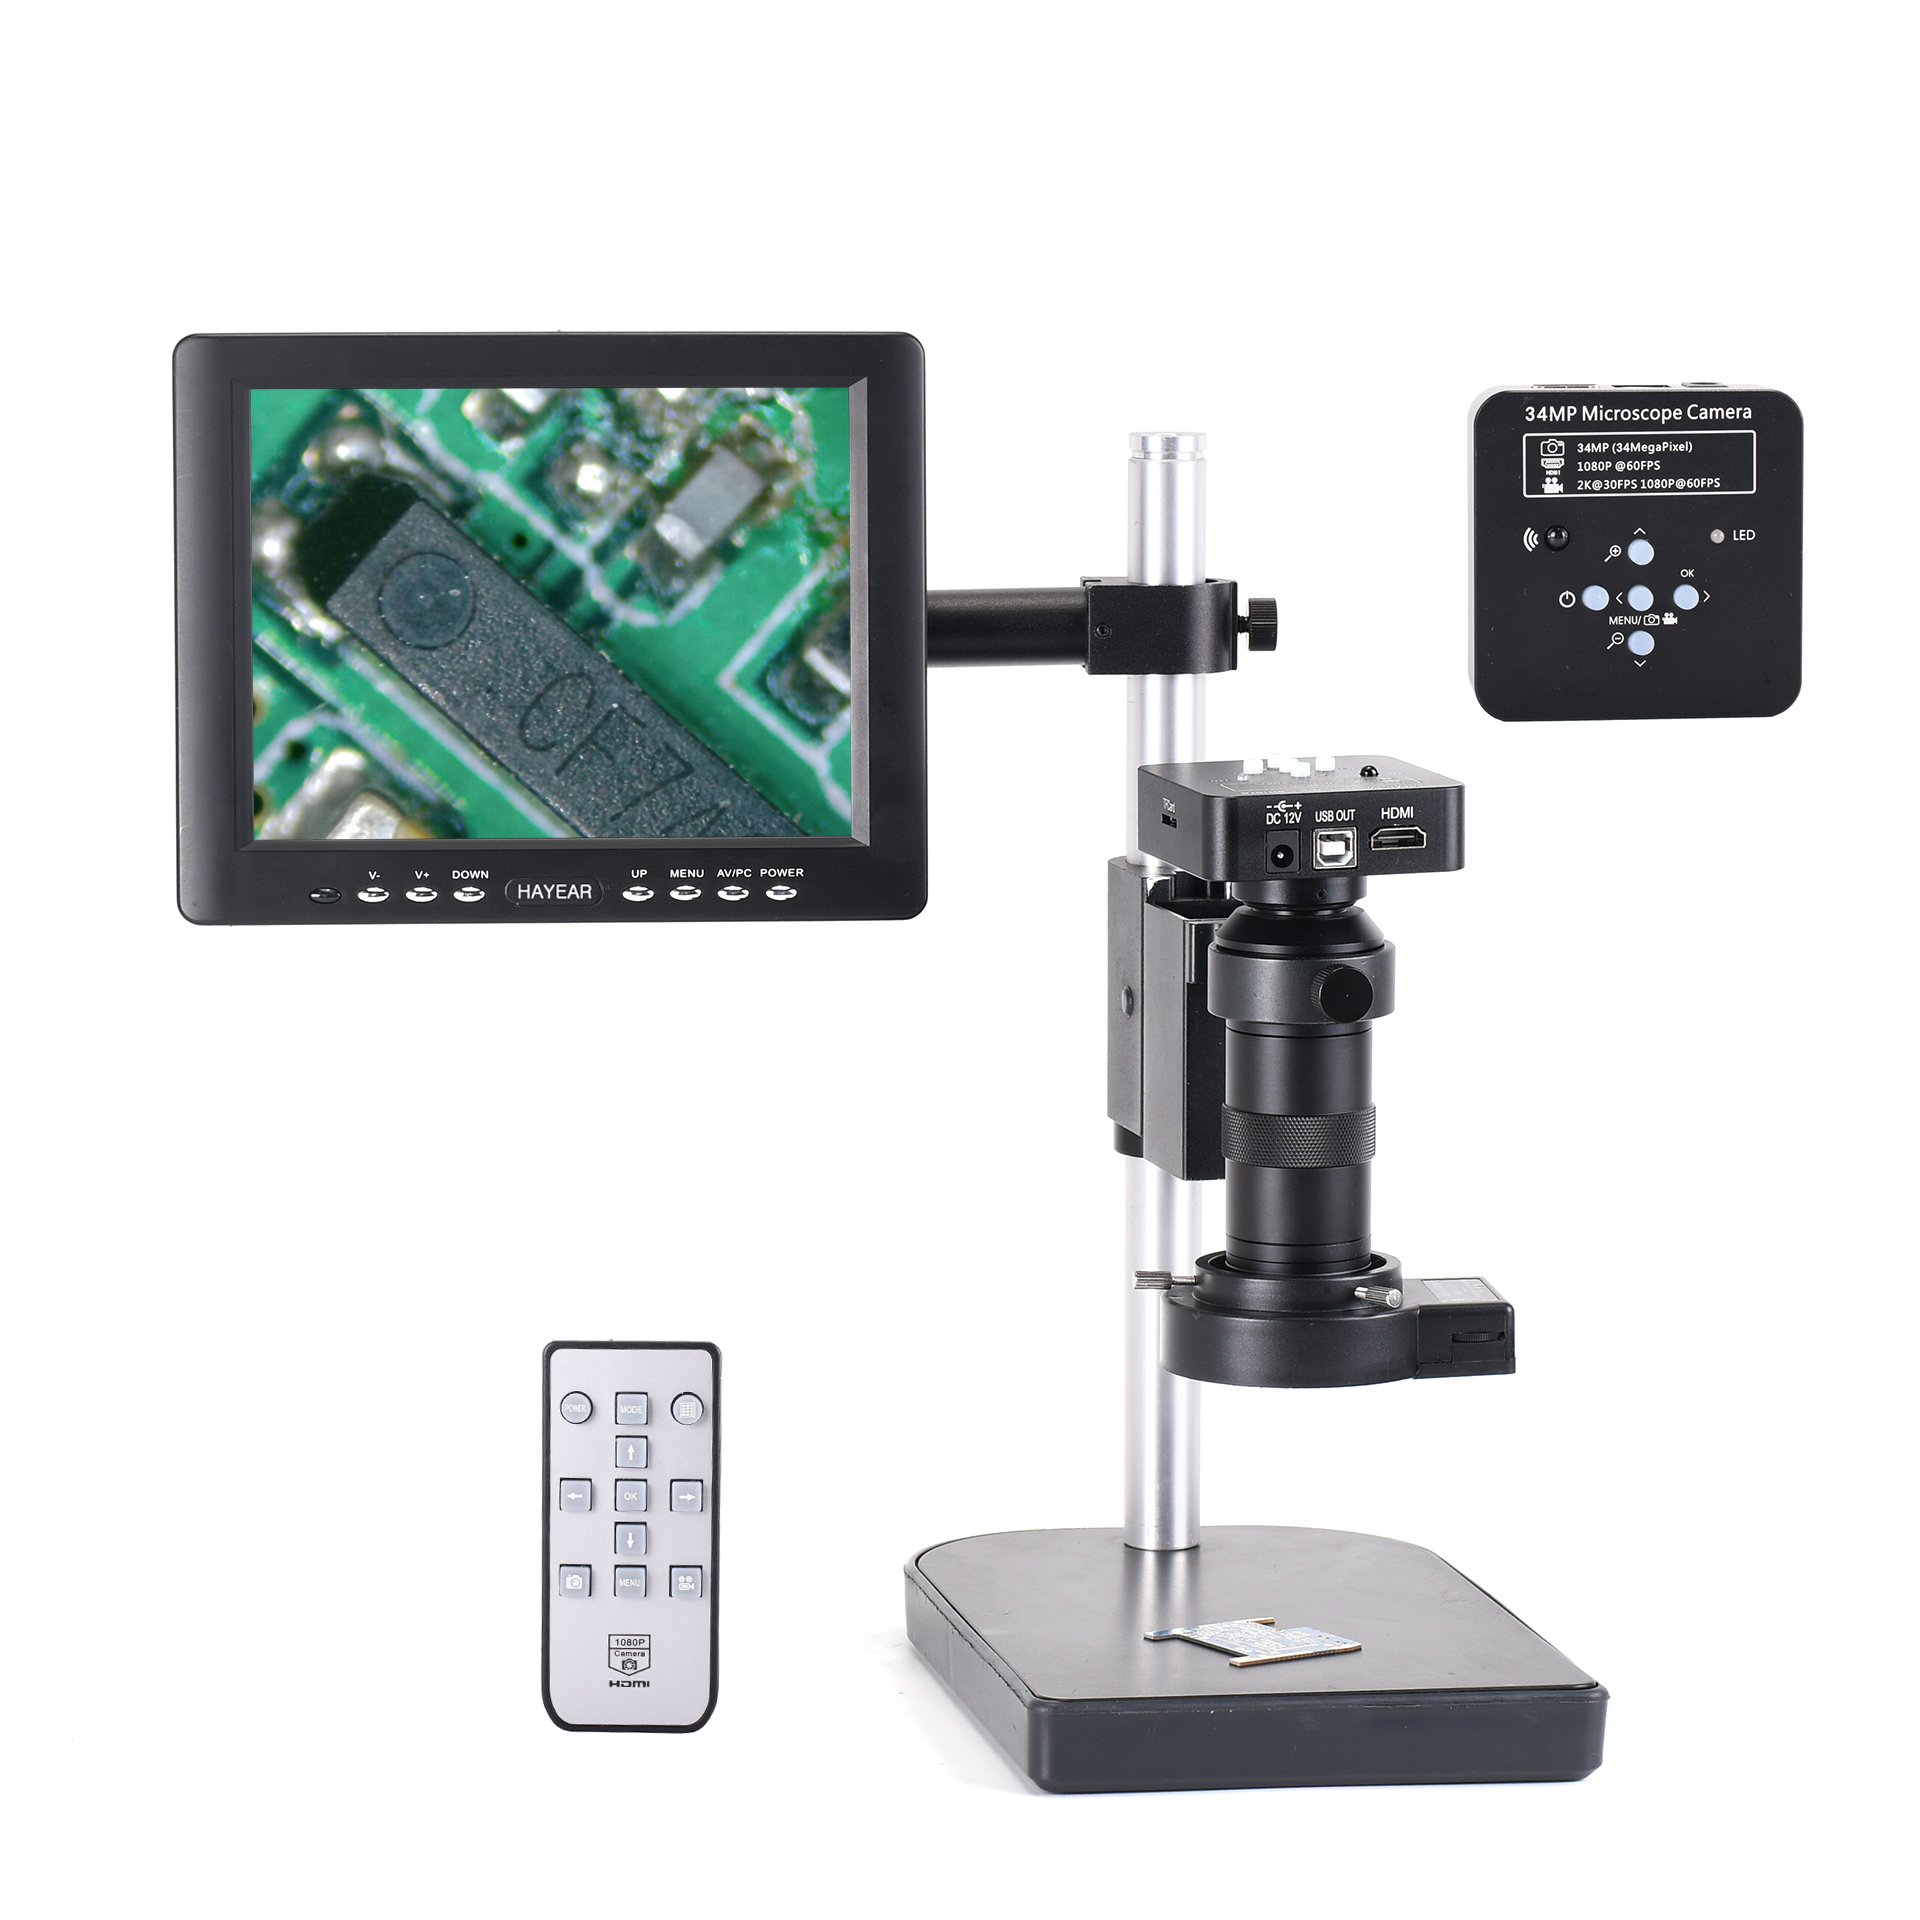 

HAYEAR 34mpMP Industrial Microscope Camera Kit HDMI USB 100X C-mount Zoom Lens 60 LED Light with 8" HD LCD Screen For Mo